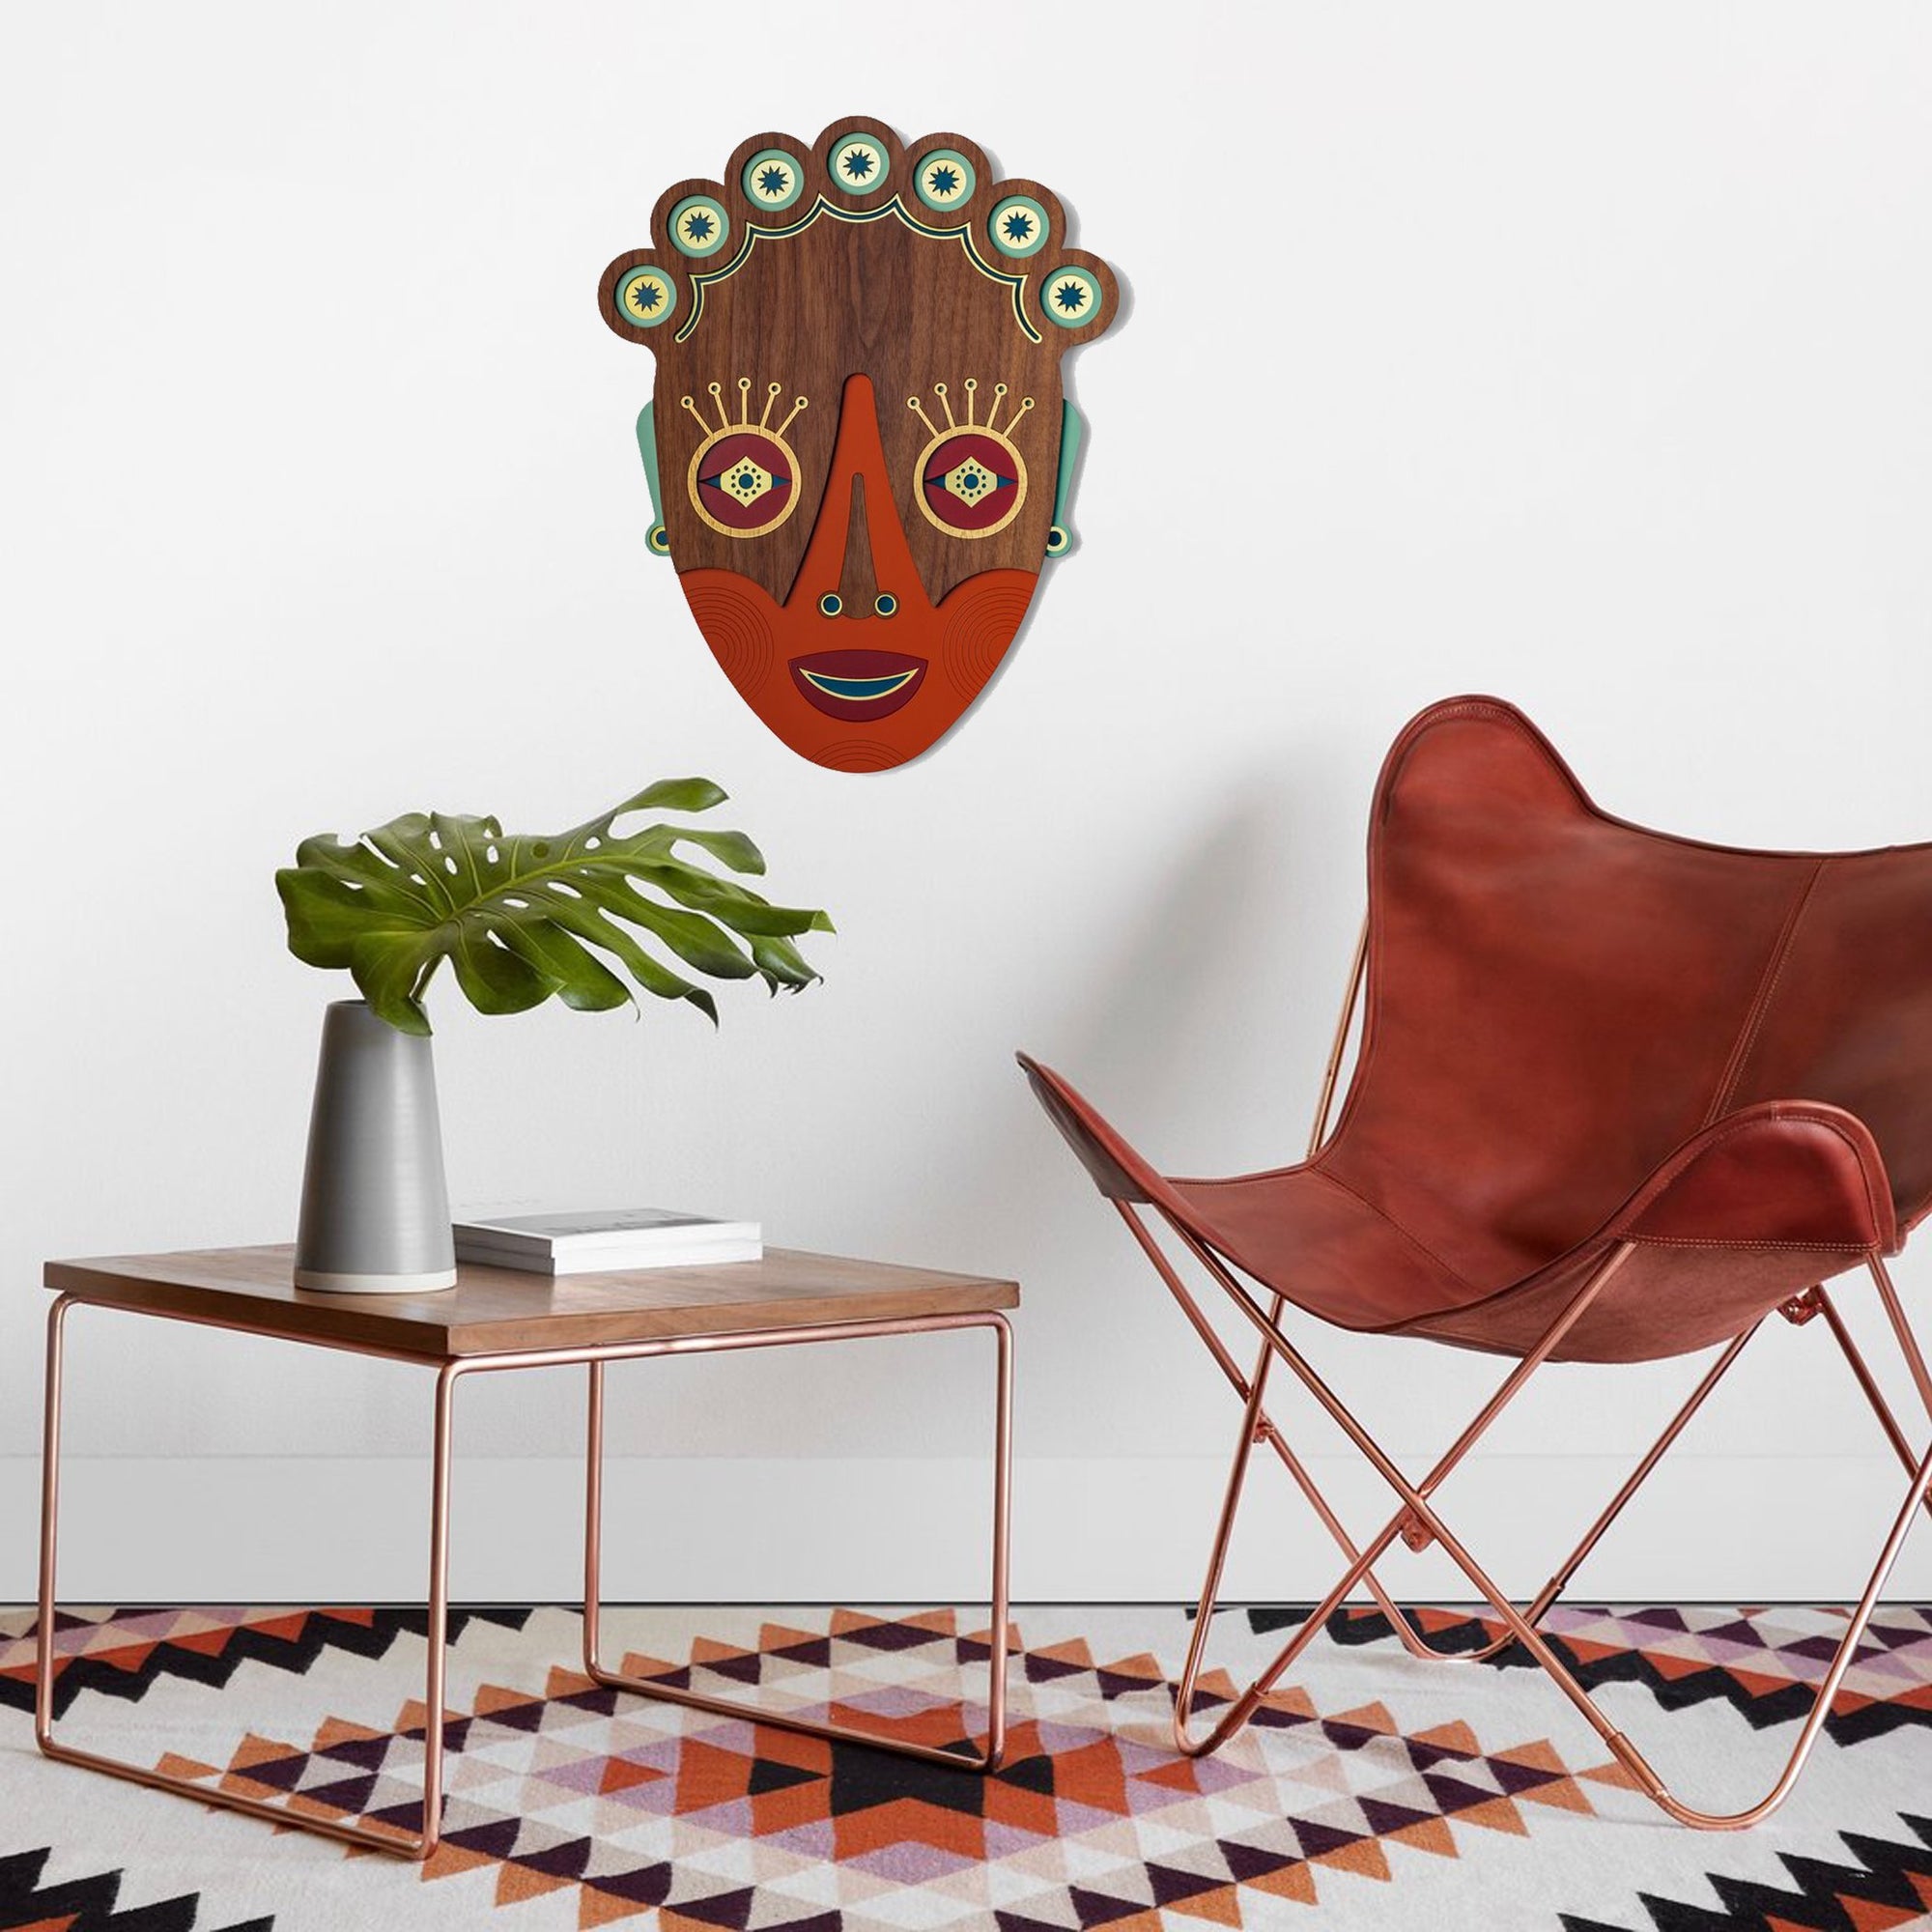 Boho Wall Hanging on the Wood Chic Wall Decor Colorful African Masks